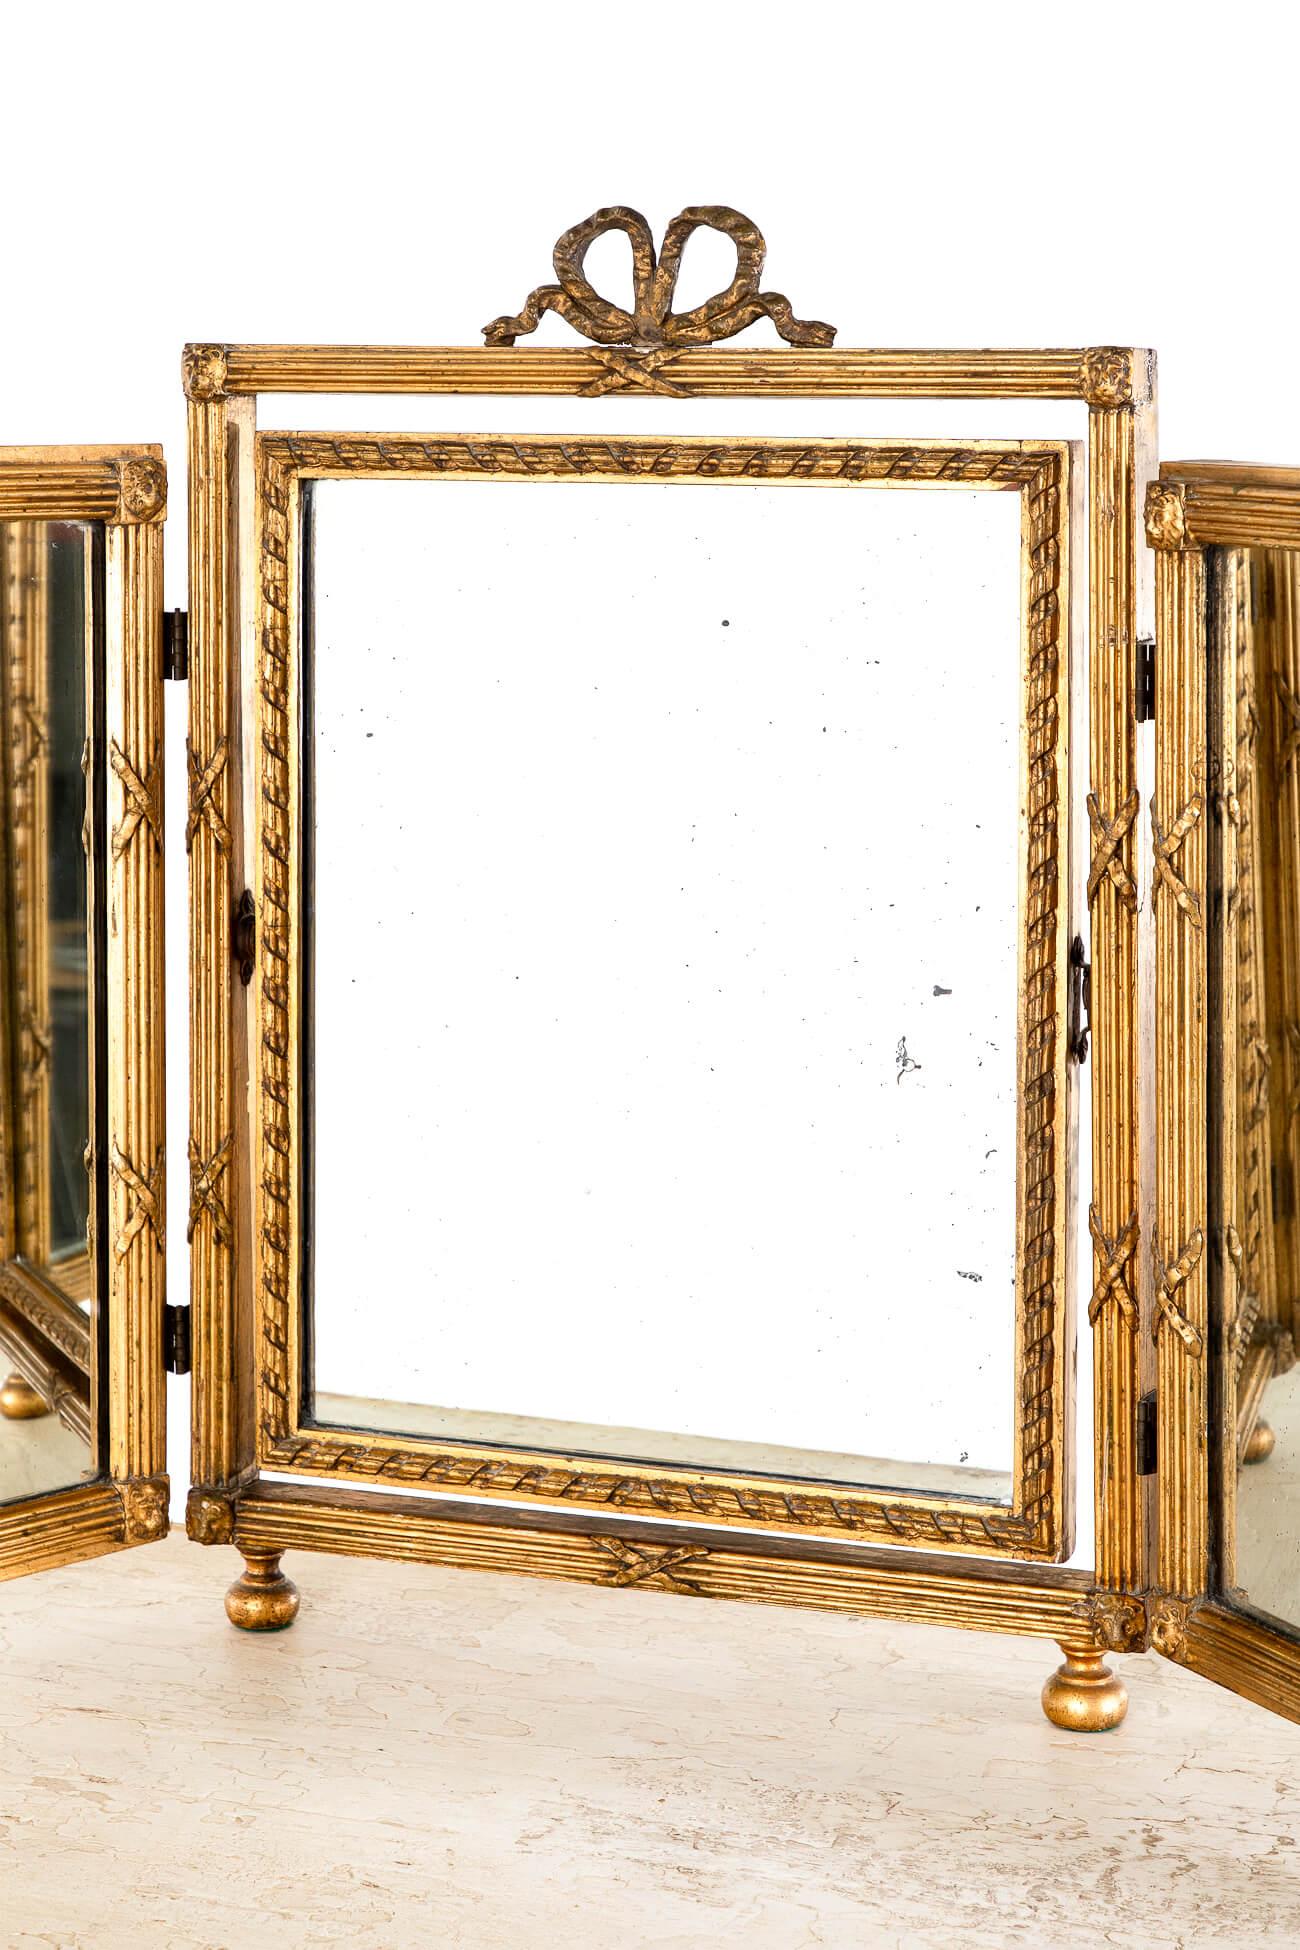 A fabulous late Georgian triptych gilt dressing table mirror in wonderful condition.

The frame to the gently foxed mirror plates is adorned with rams heads and Regency style bows.

The frame displays the original backing and resting on gilt bun